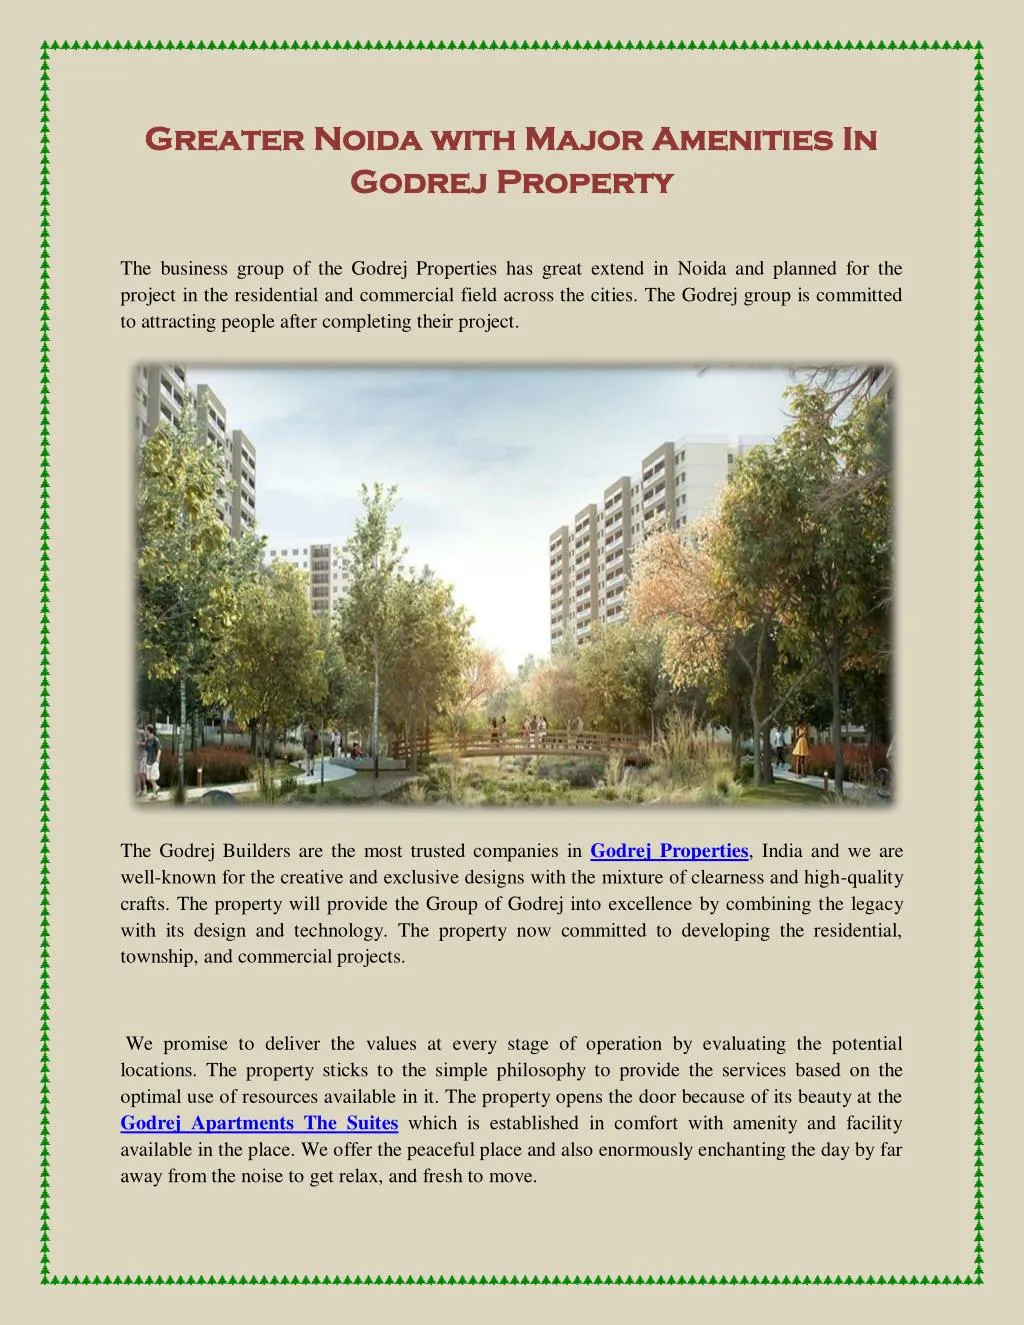 greater noida with major amenities in greater n.